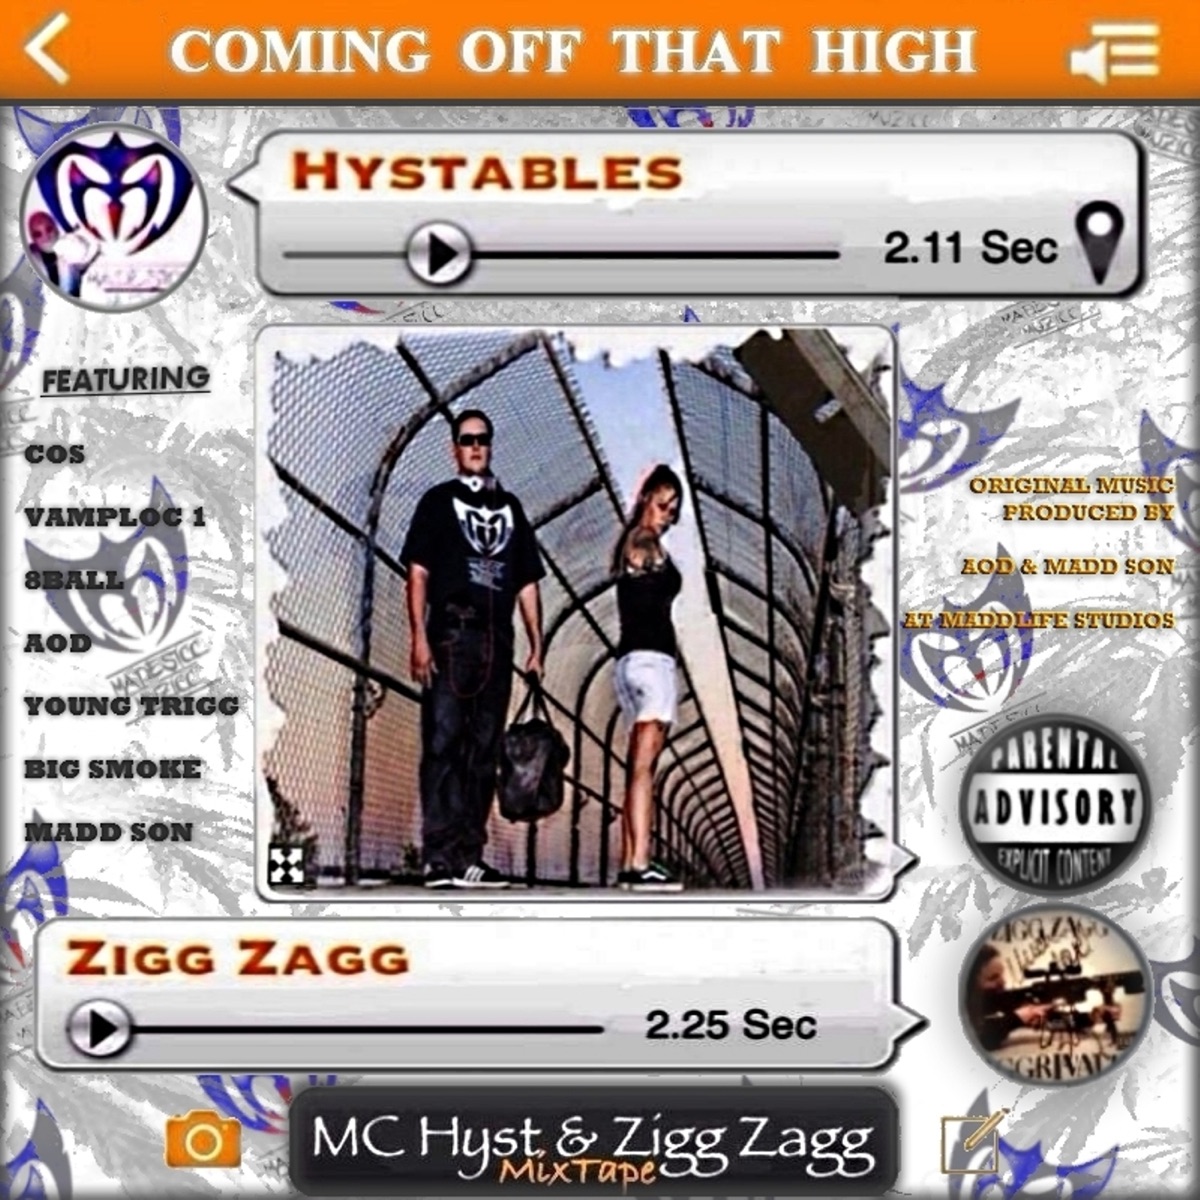 Zigg Zagg & Hystables - Coming Off That High